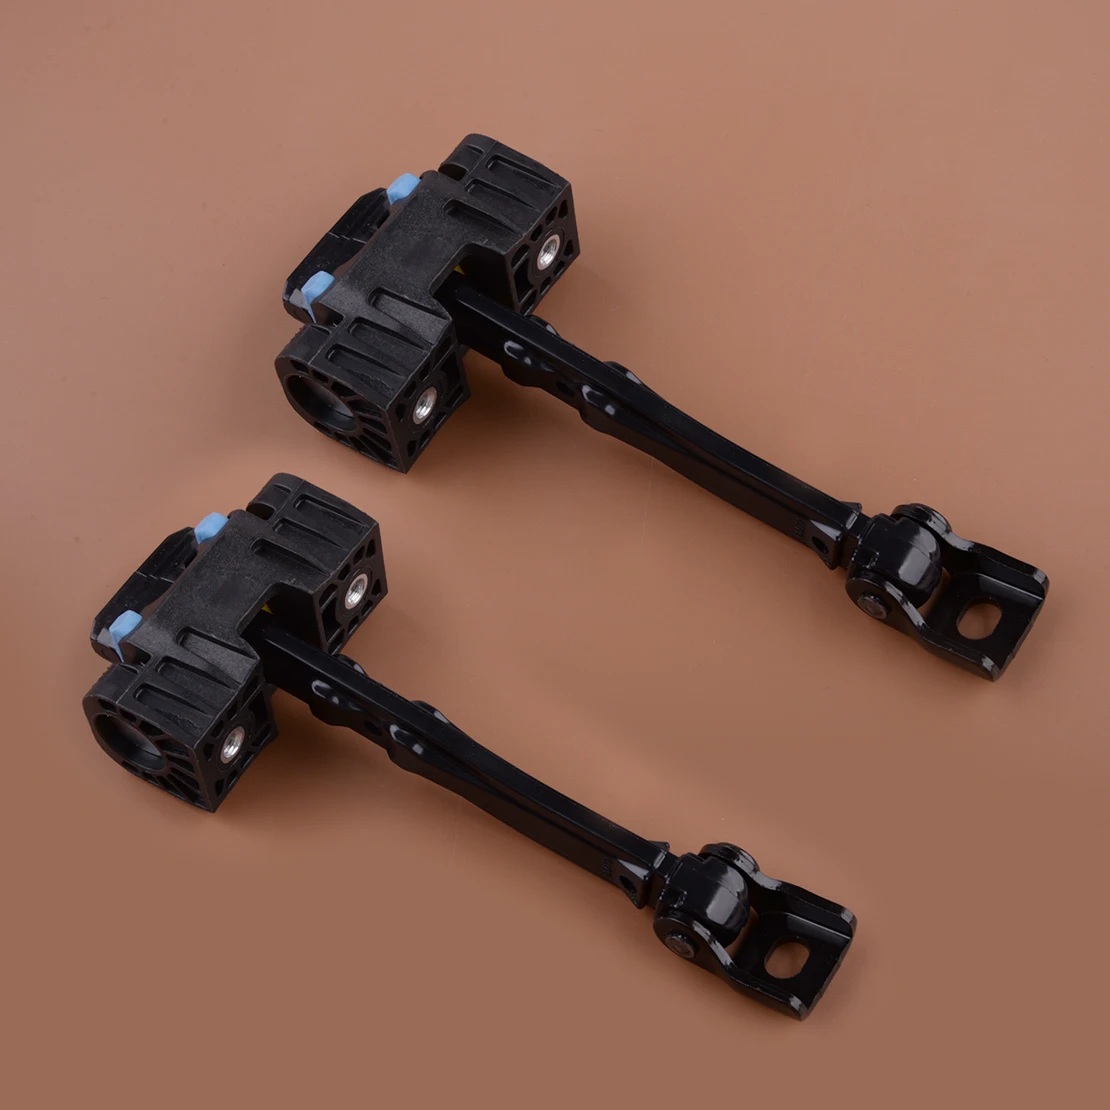 

2Pcs Front Door Brake Check Stopper Hinge 51217176811 Fit for Mini Cooper R50 R52 R53 R56 R57 R58 Clubman R55 Roadster R59